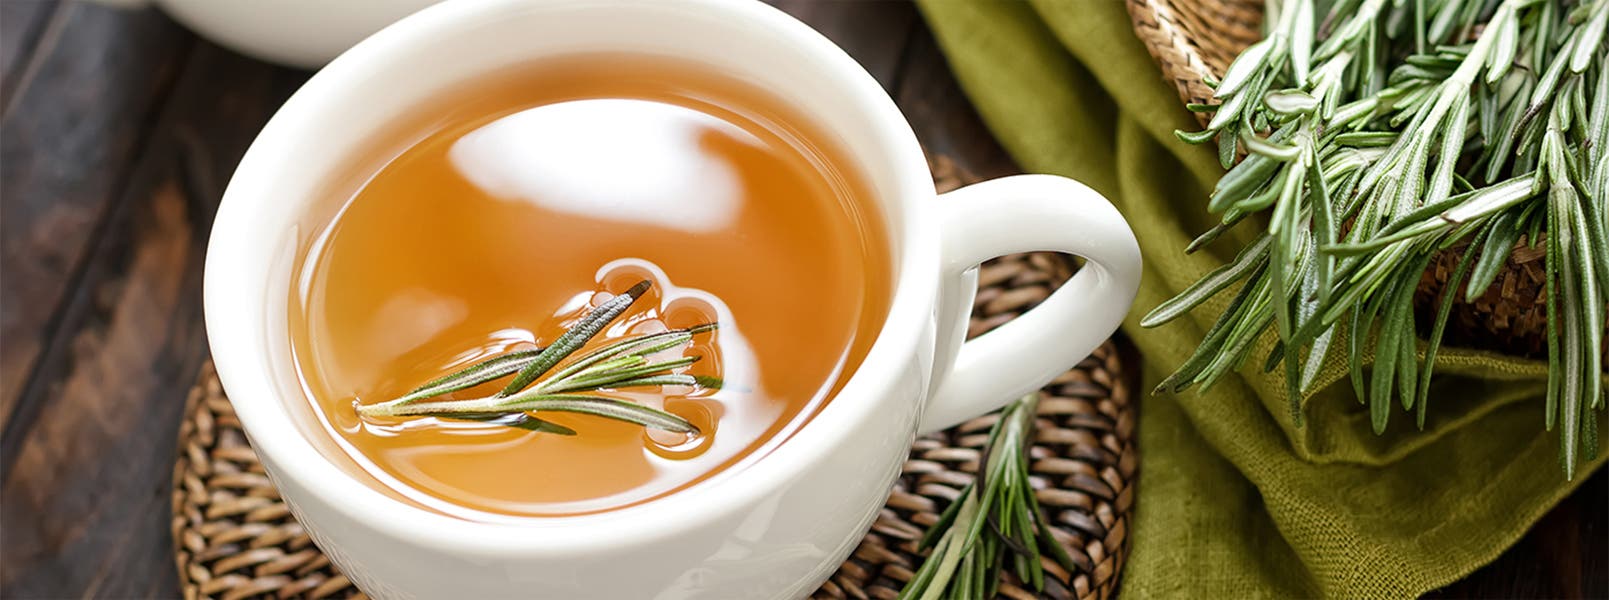 Rosemary Tea For Hair: Benefits & How to Use It